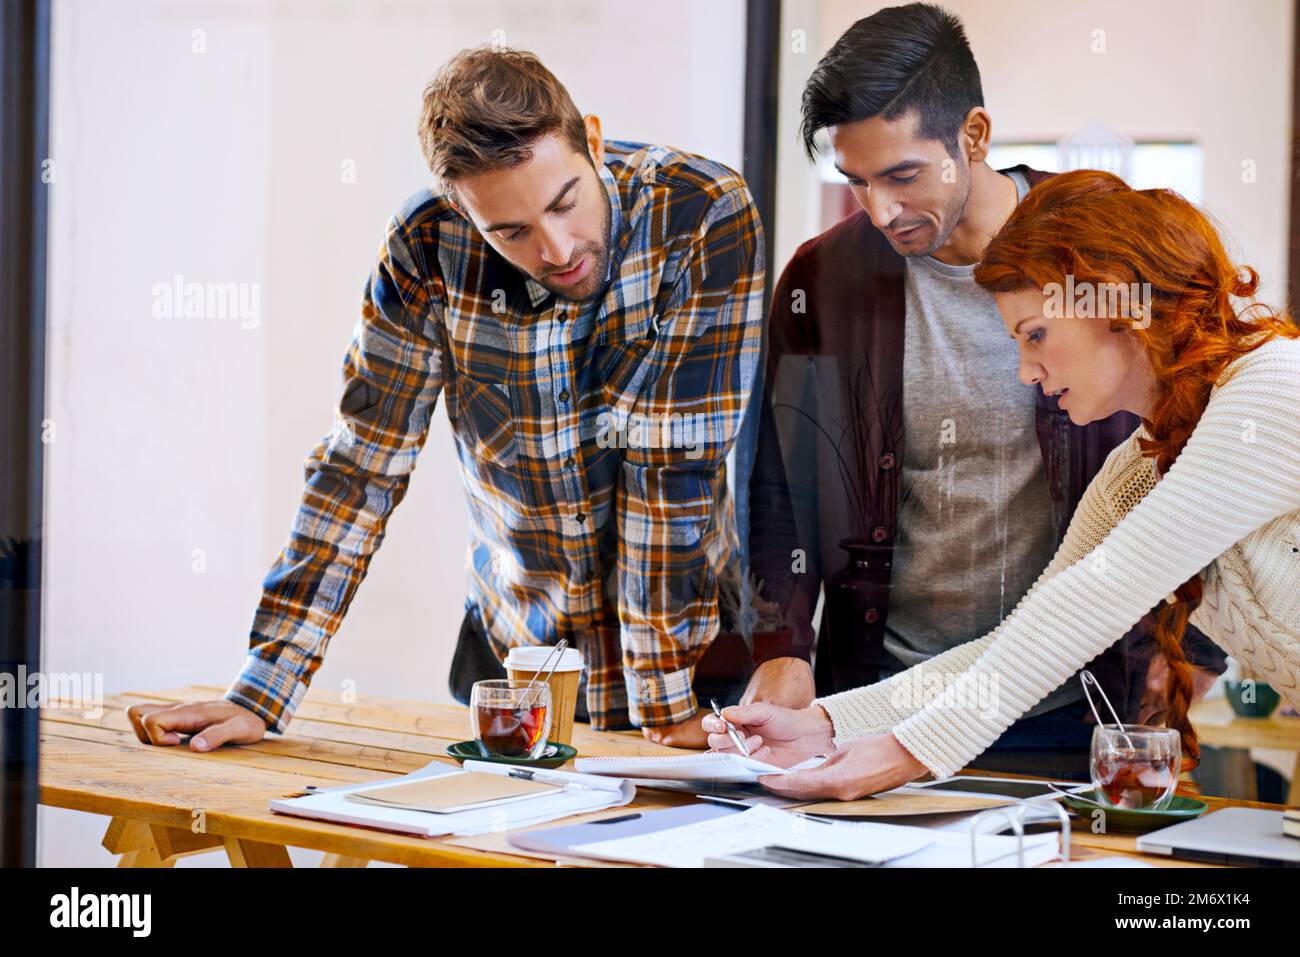 Combining their creative powers. a team of young designers working together in their office. Stock Photo